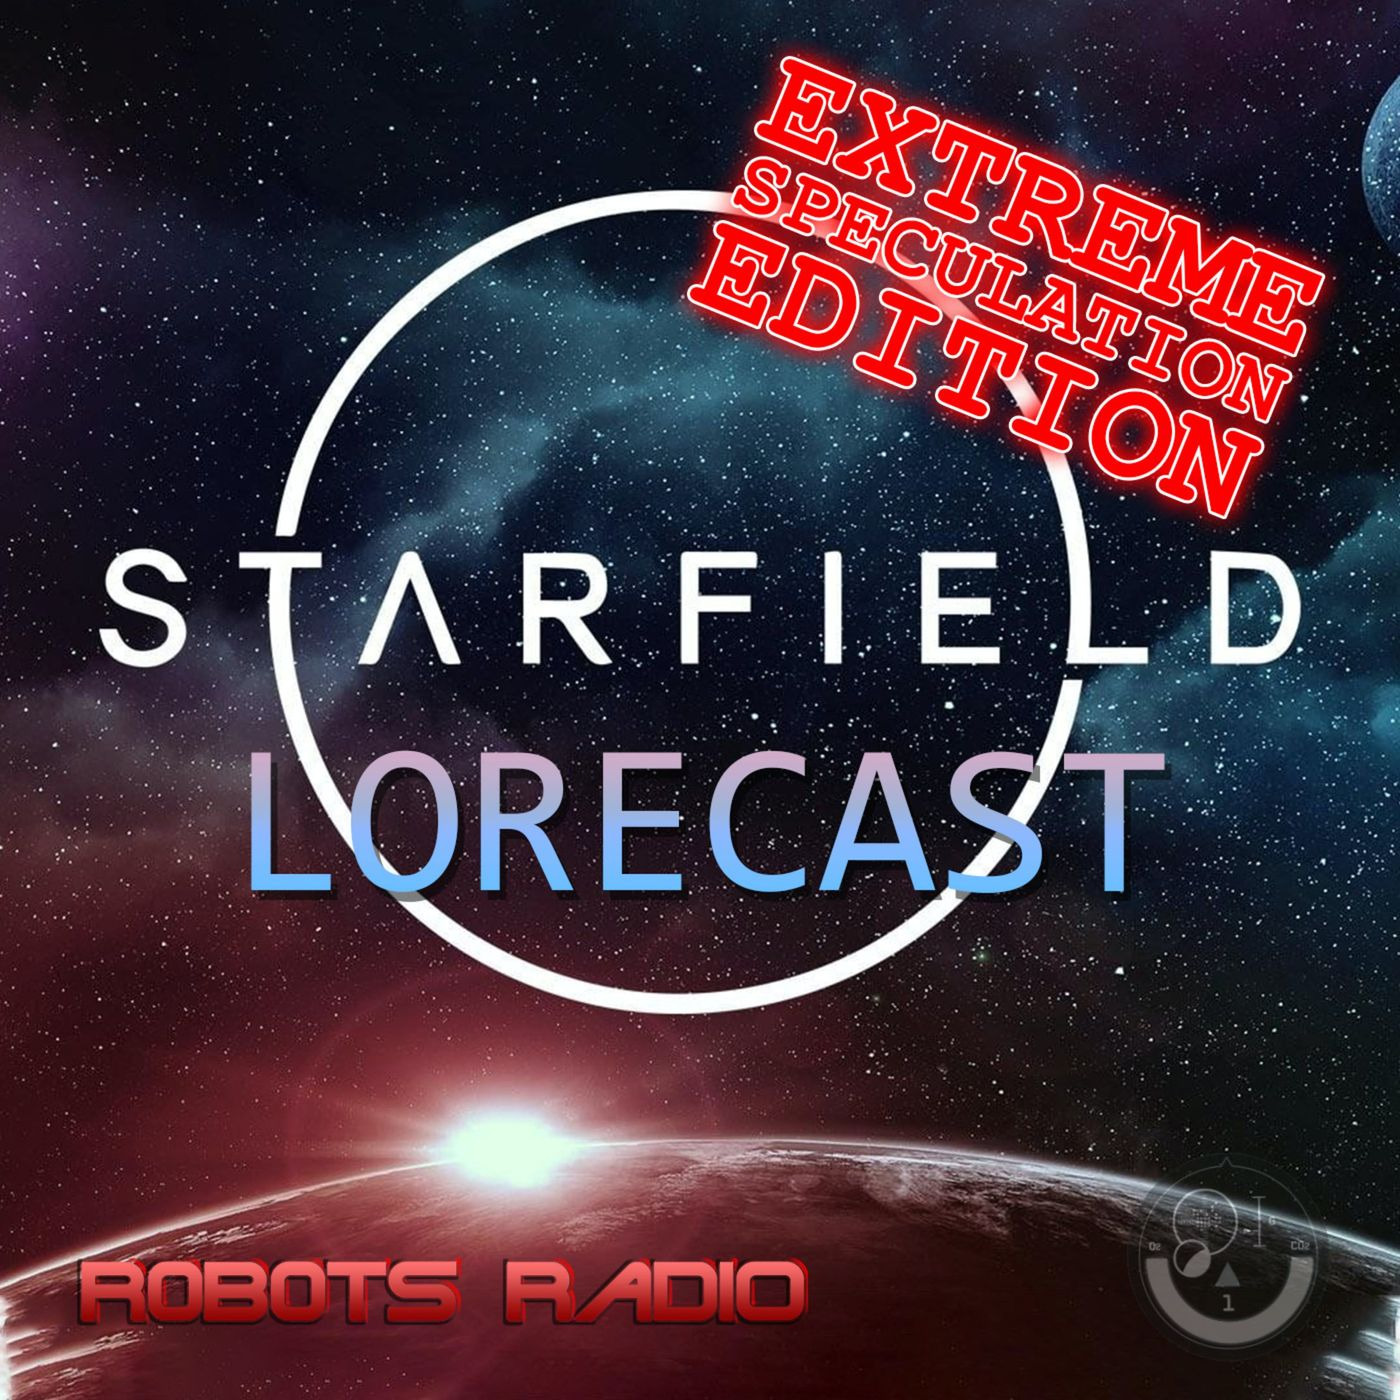 SPECULATION EPISODE 01: Leaked Images, Spicy Predictions, MS Paint Art & More | Starfield Lorecast Episode 1